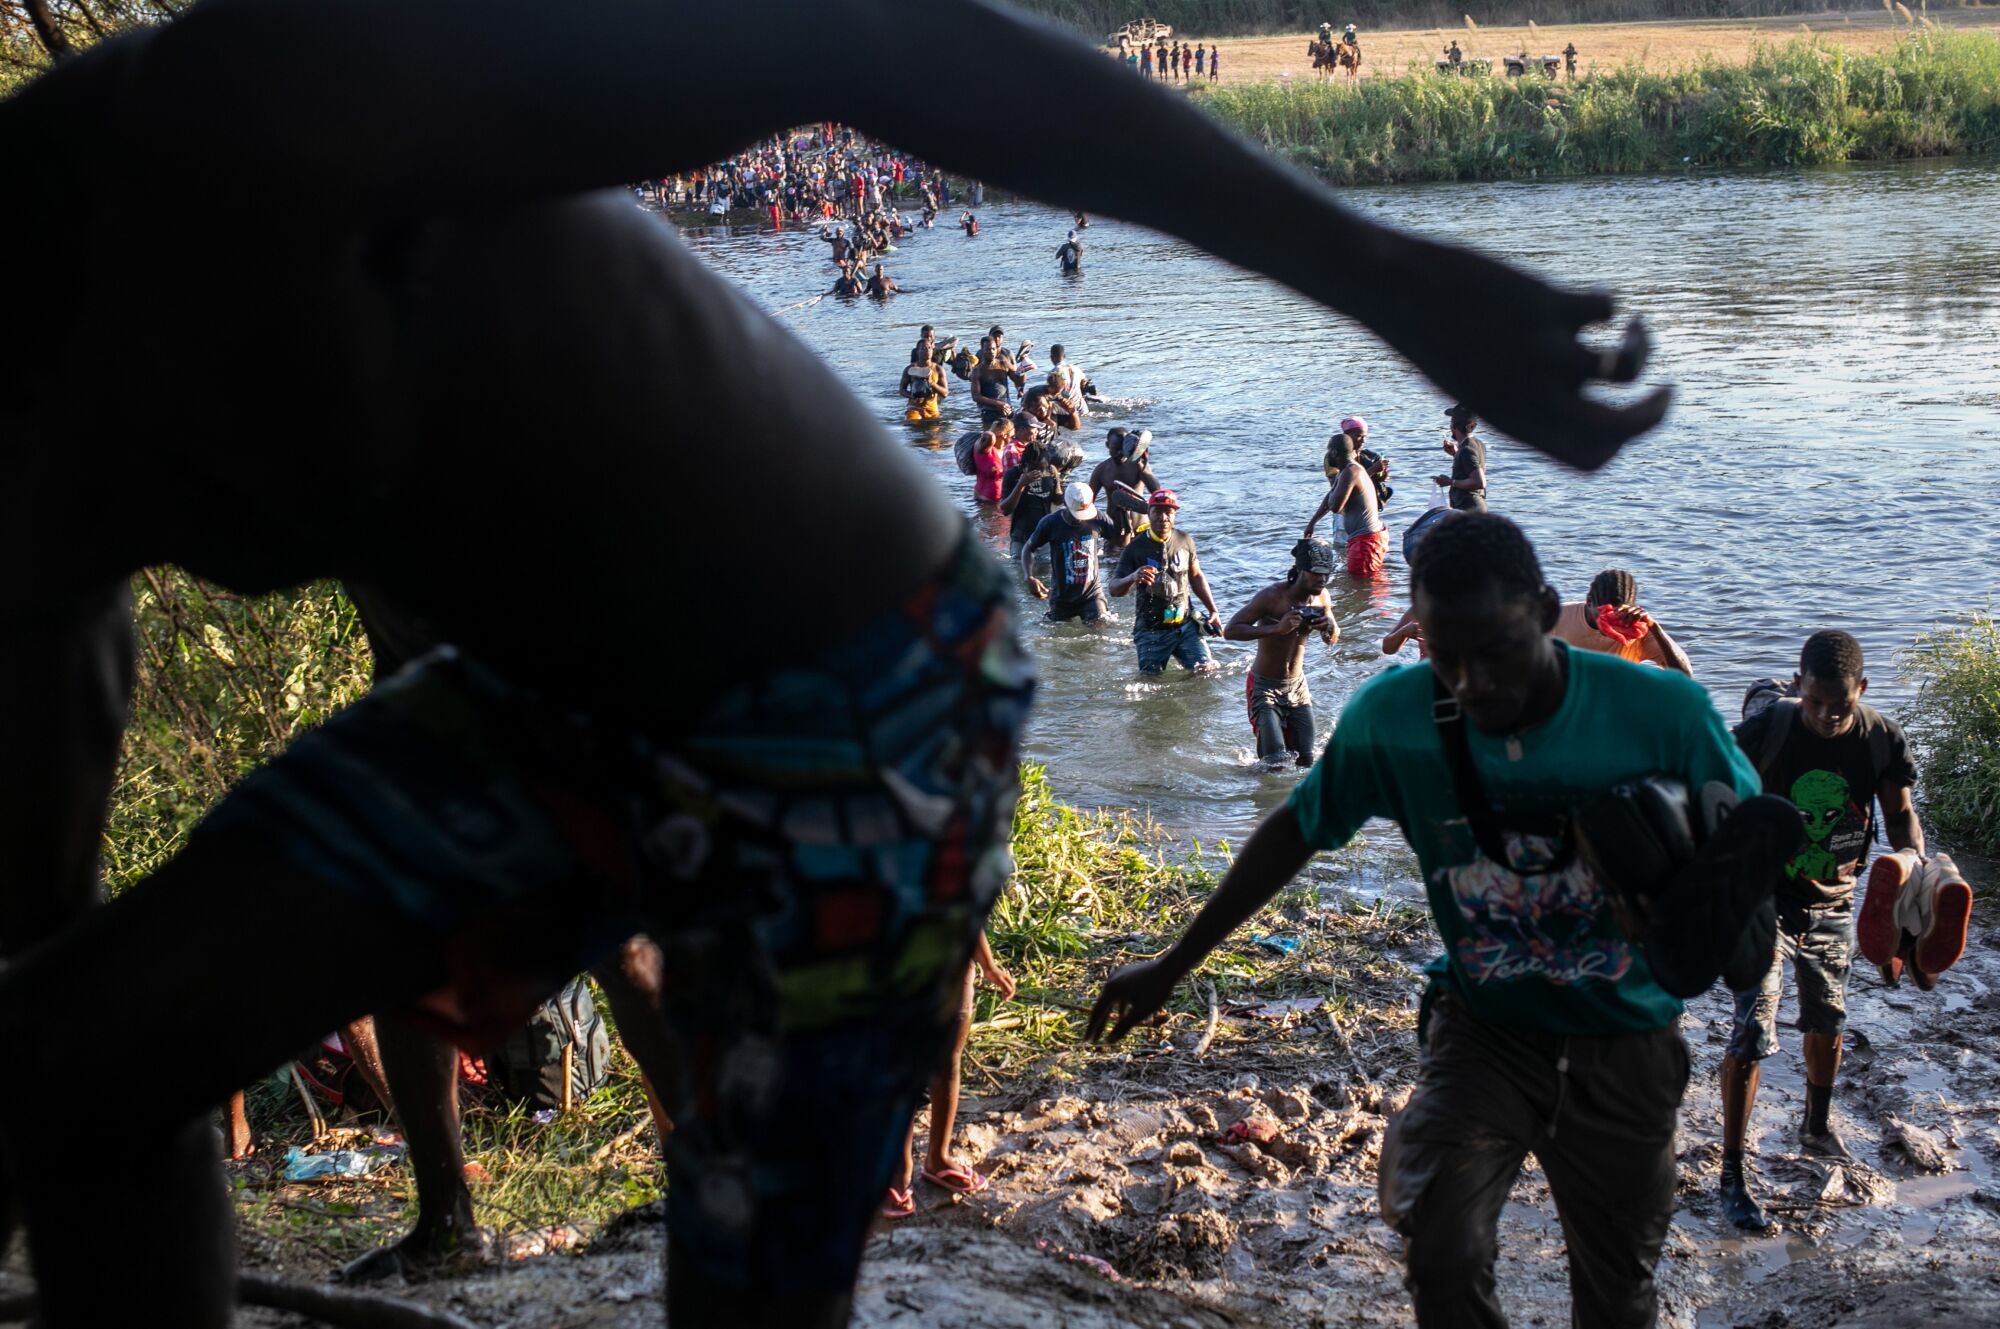 A long line of Haitian immigrants emerges from the banks of the Rio Grande and back onto Mexican soil.